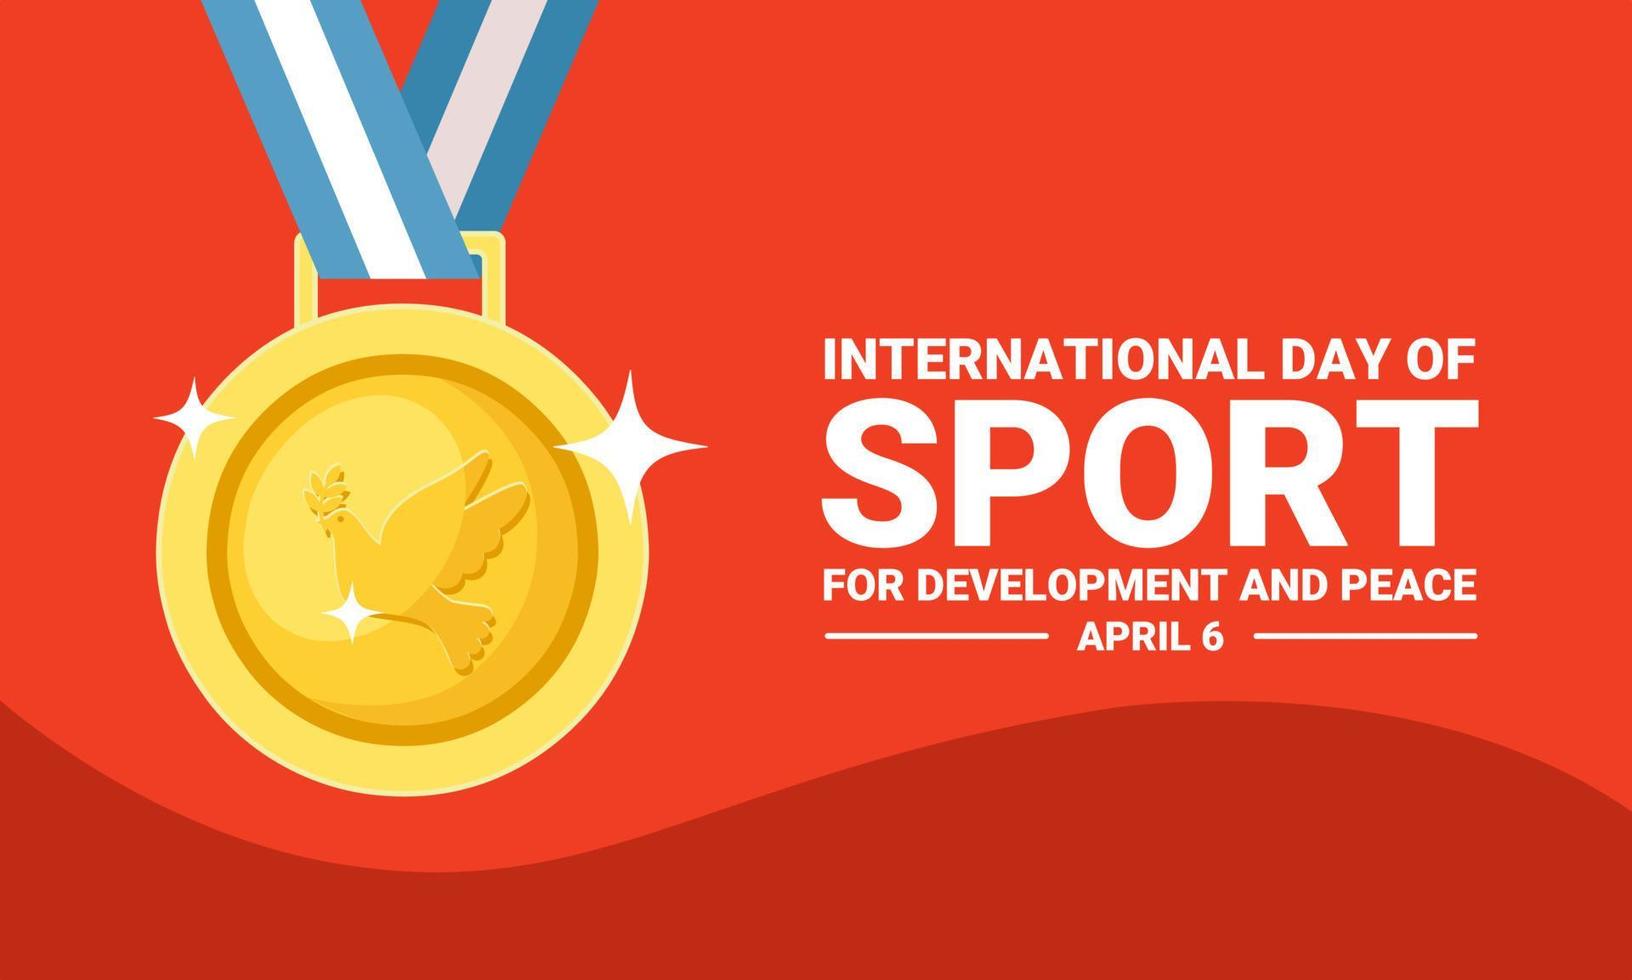 Vector illustration of gold medal with peace dove symbol, as a banner or poster, International Day of Sport for Development and Peace.